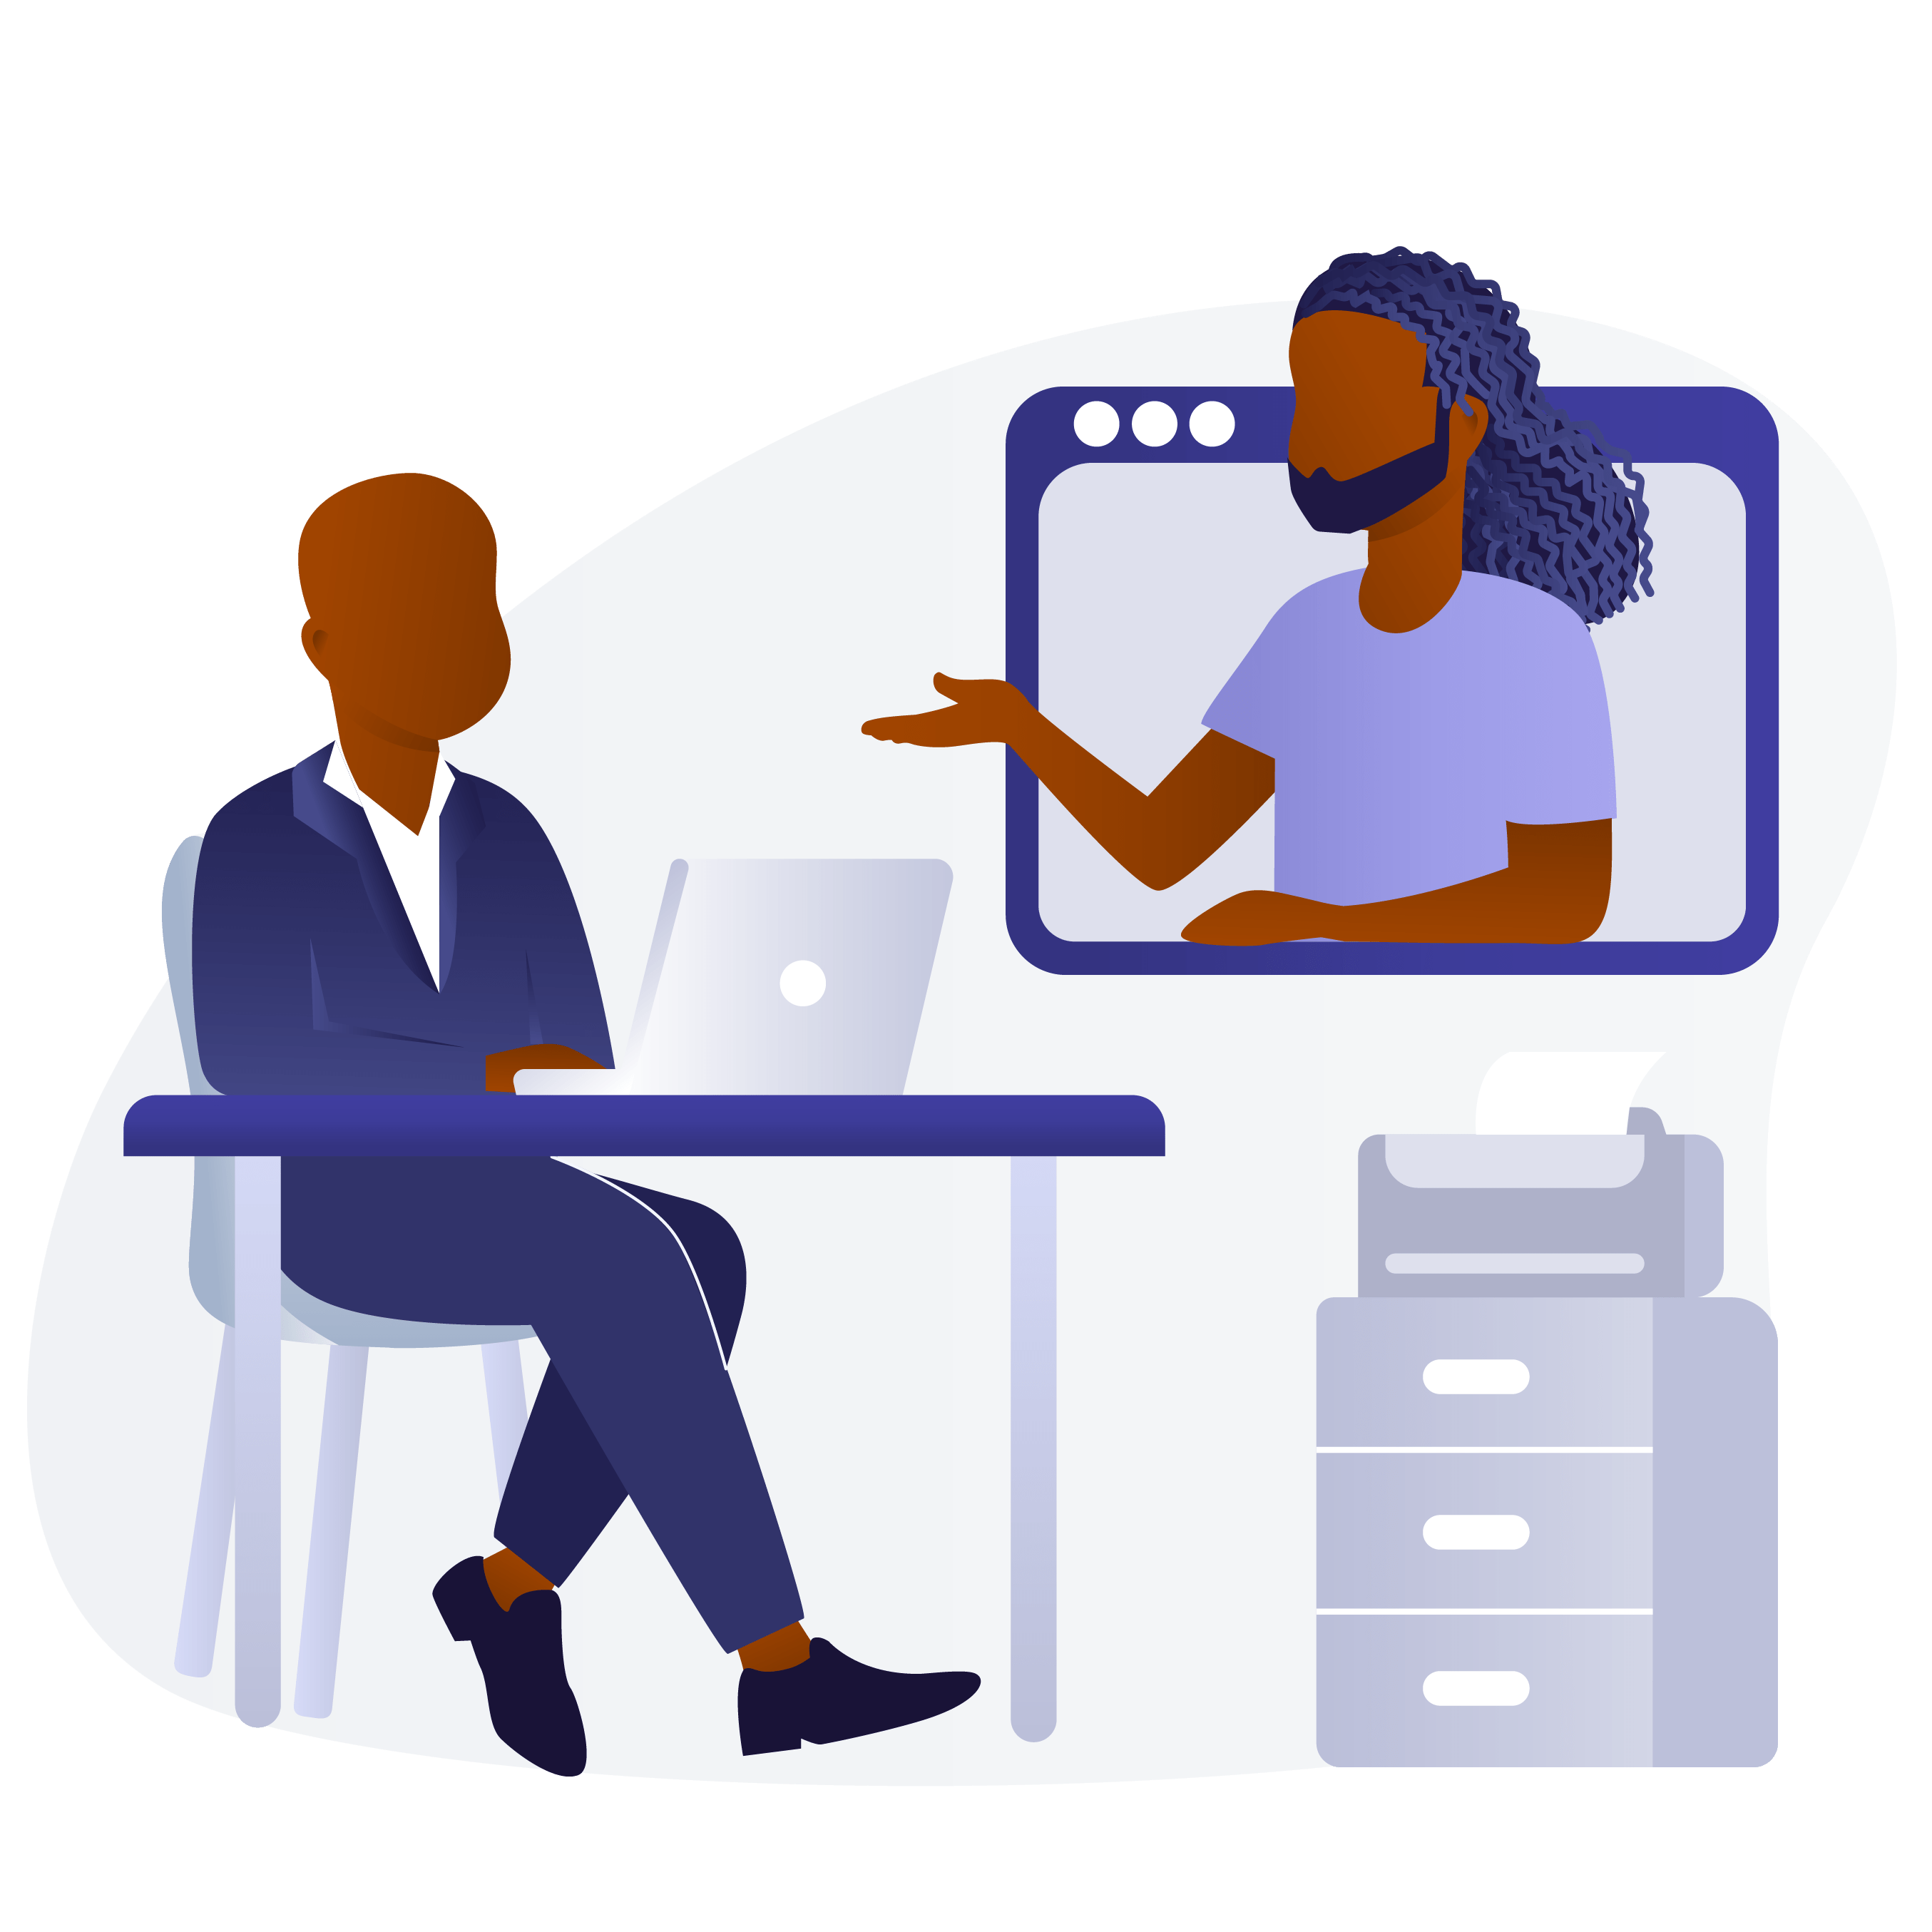 An illustrated image of two Black men video chatting in an office environment